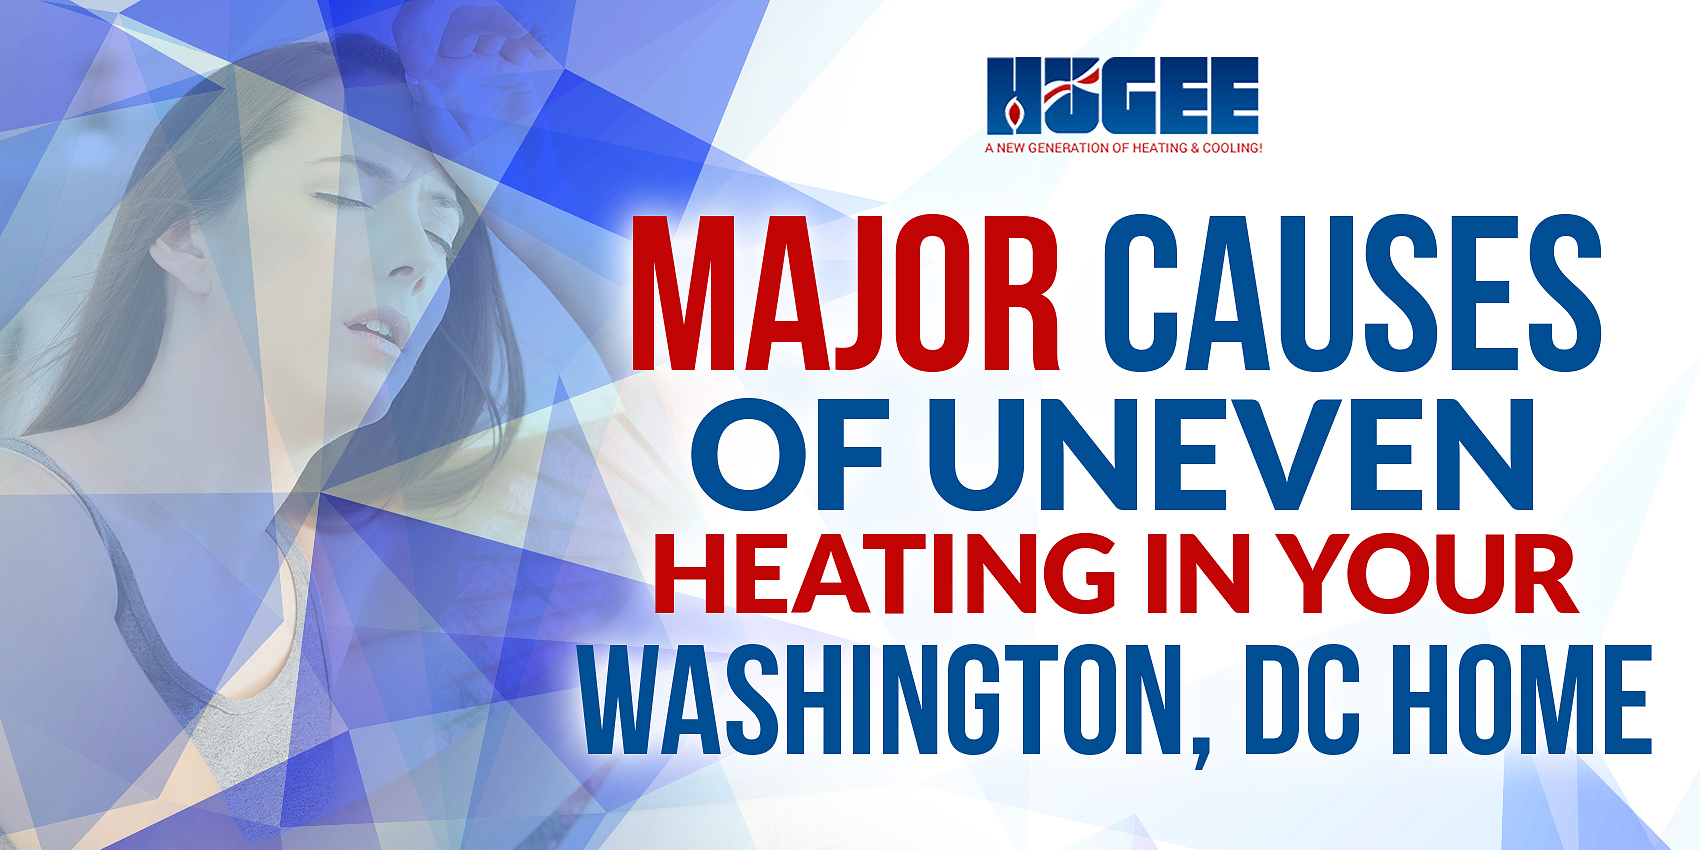 Major Causes of Uneven Heating in Your Washington, DC Home